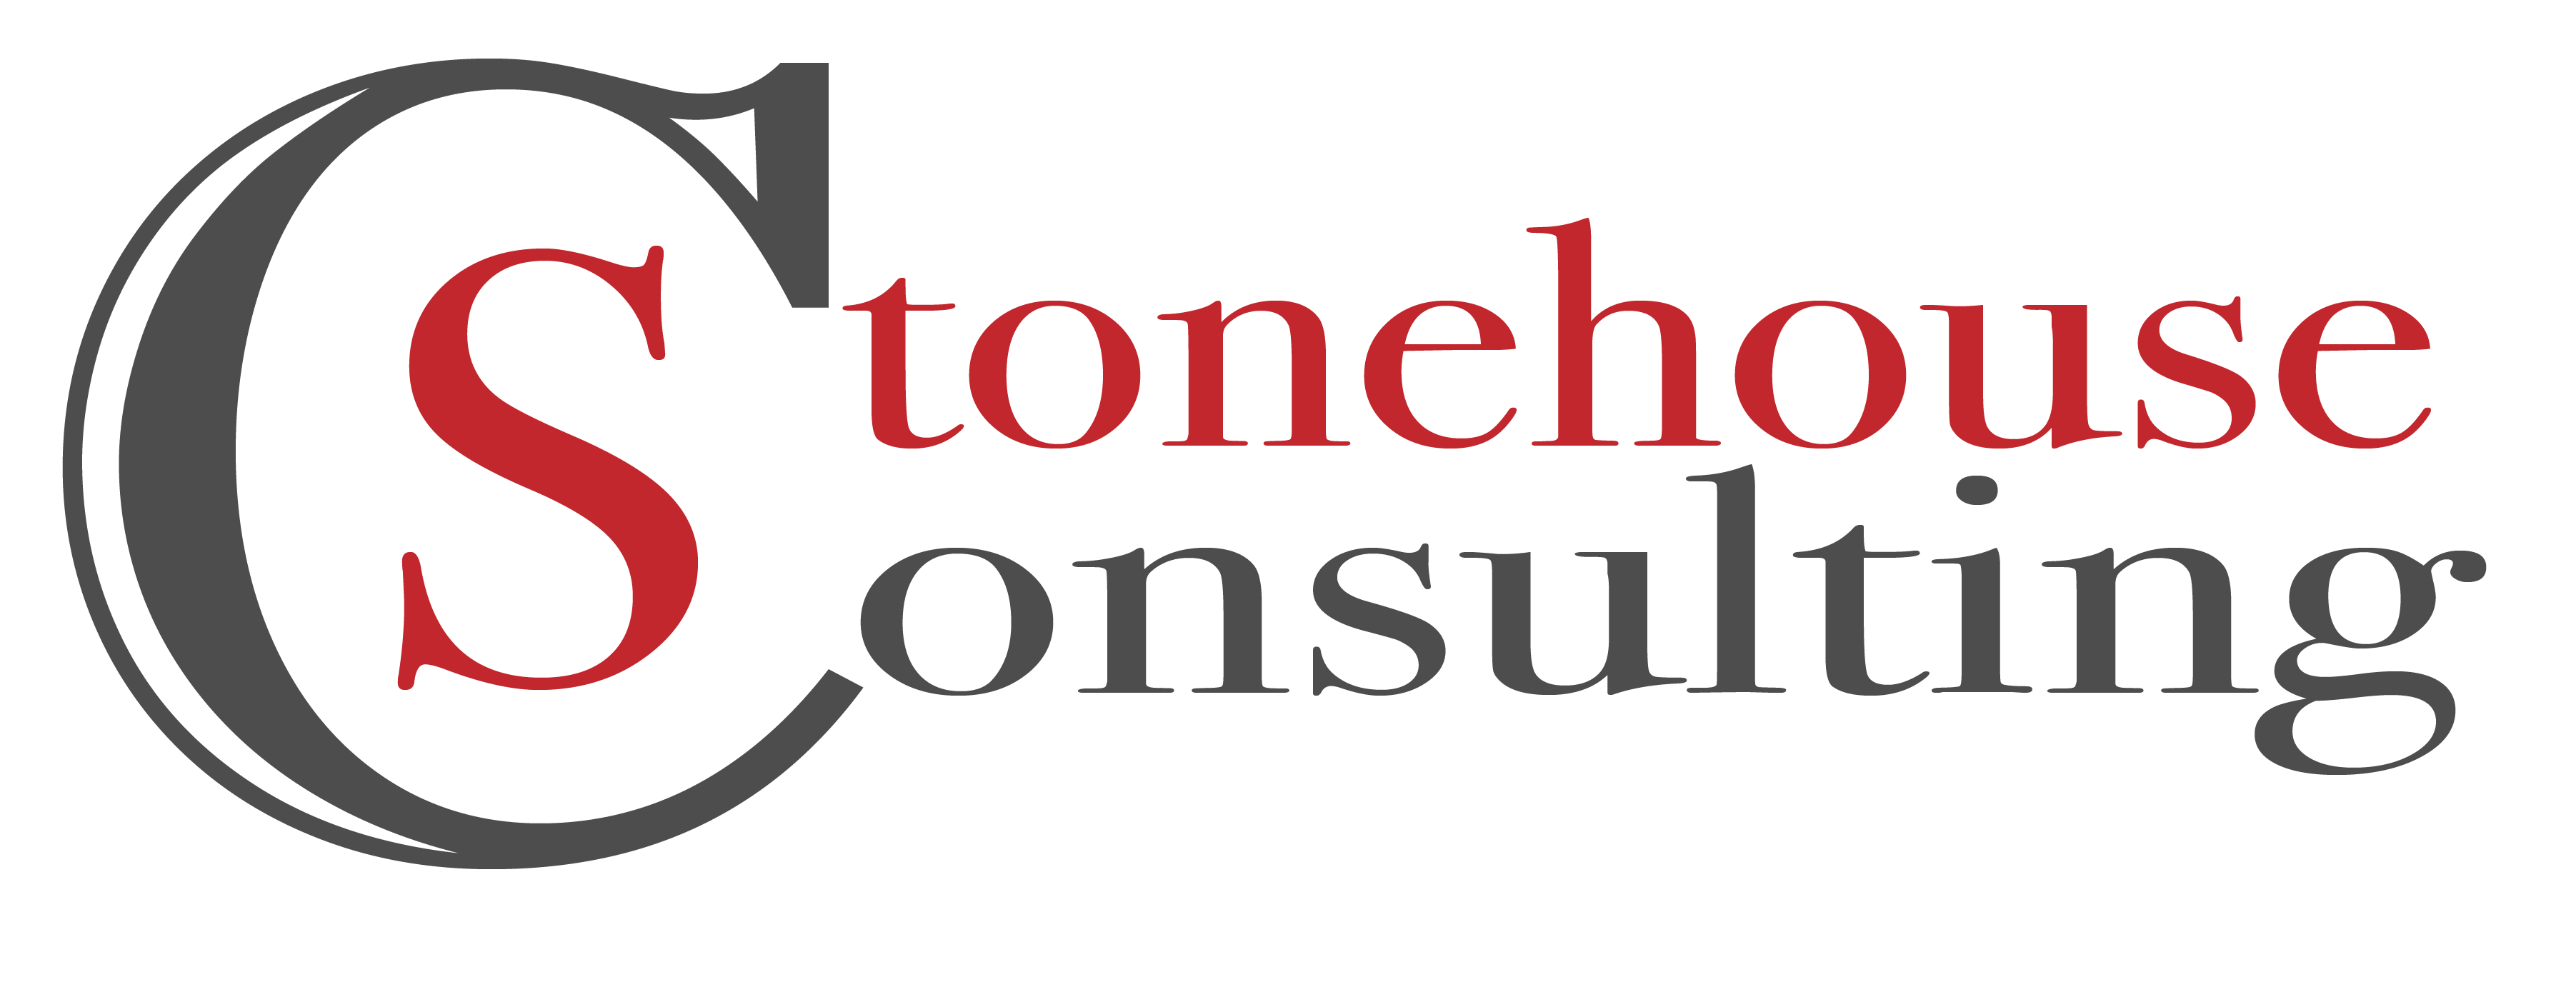 Stonehouse Consulting logo